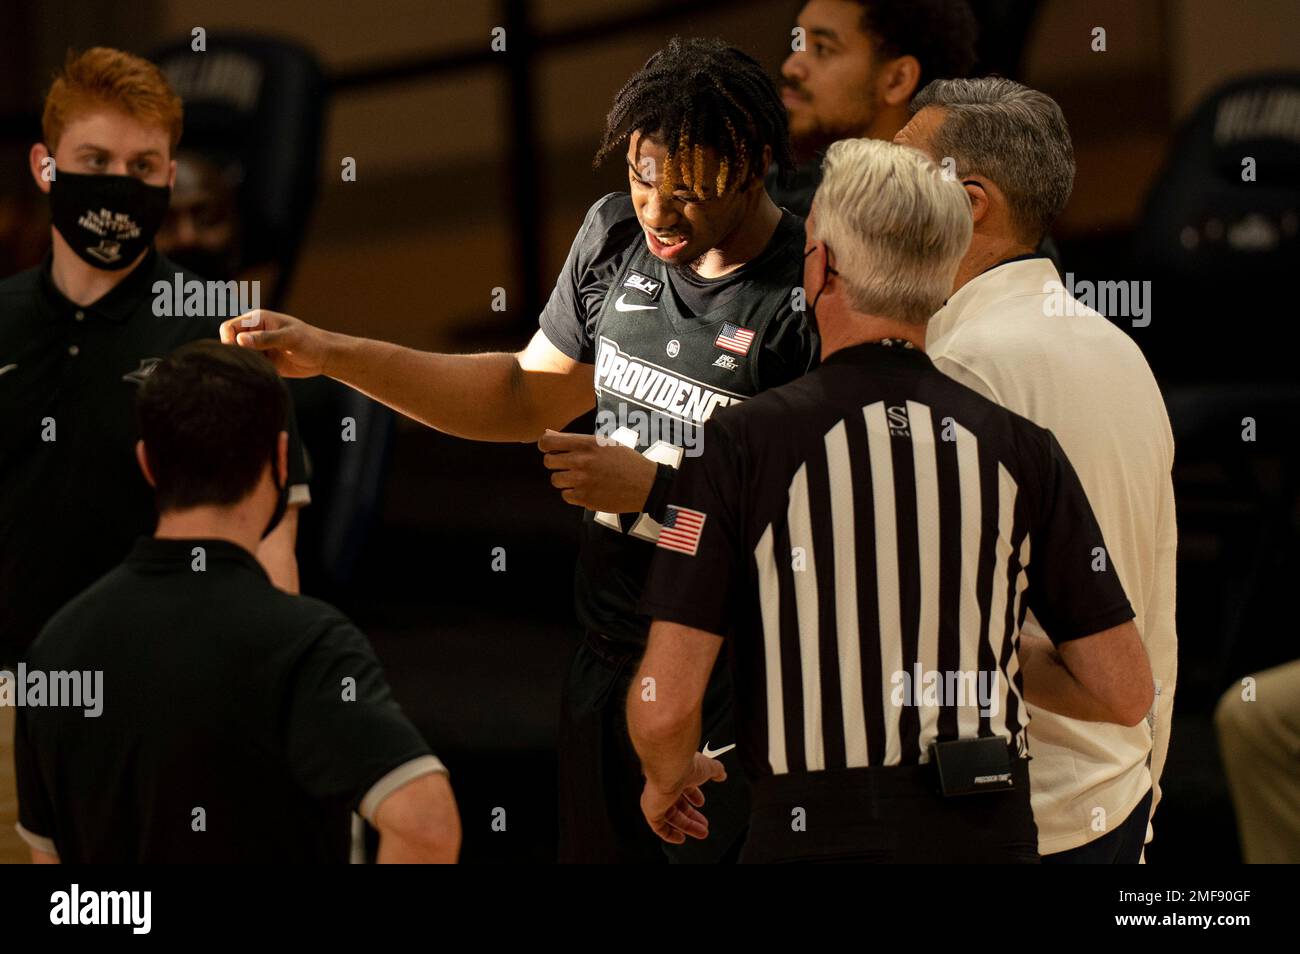 Providences Brycen Goodine, center, reacts to the stream of sunlight as Villanovas head coach Jay Wright, right, looks on with the official as it causes a delay in the start of the